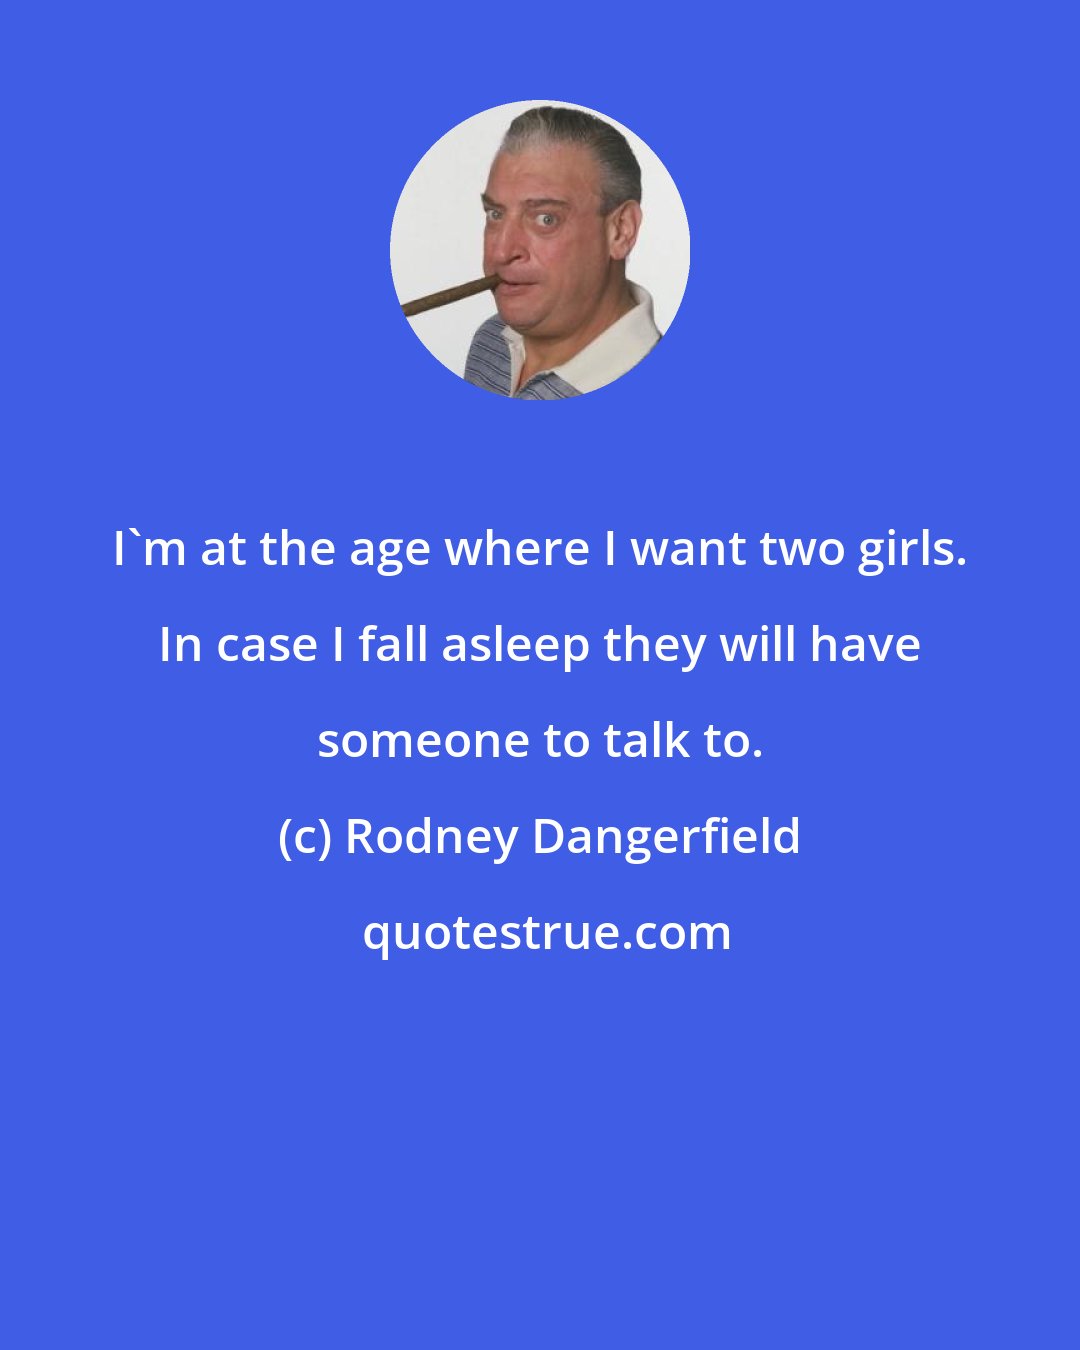 Rodney Dangerfield: I'm at the age where I want two girls. In case I fall asleep they will have someone to talk to.